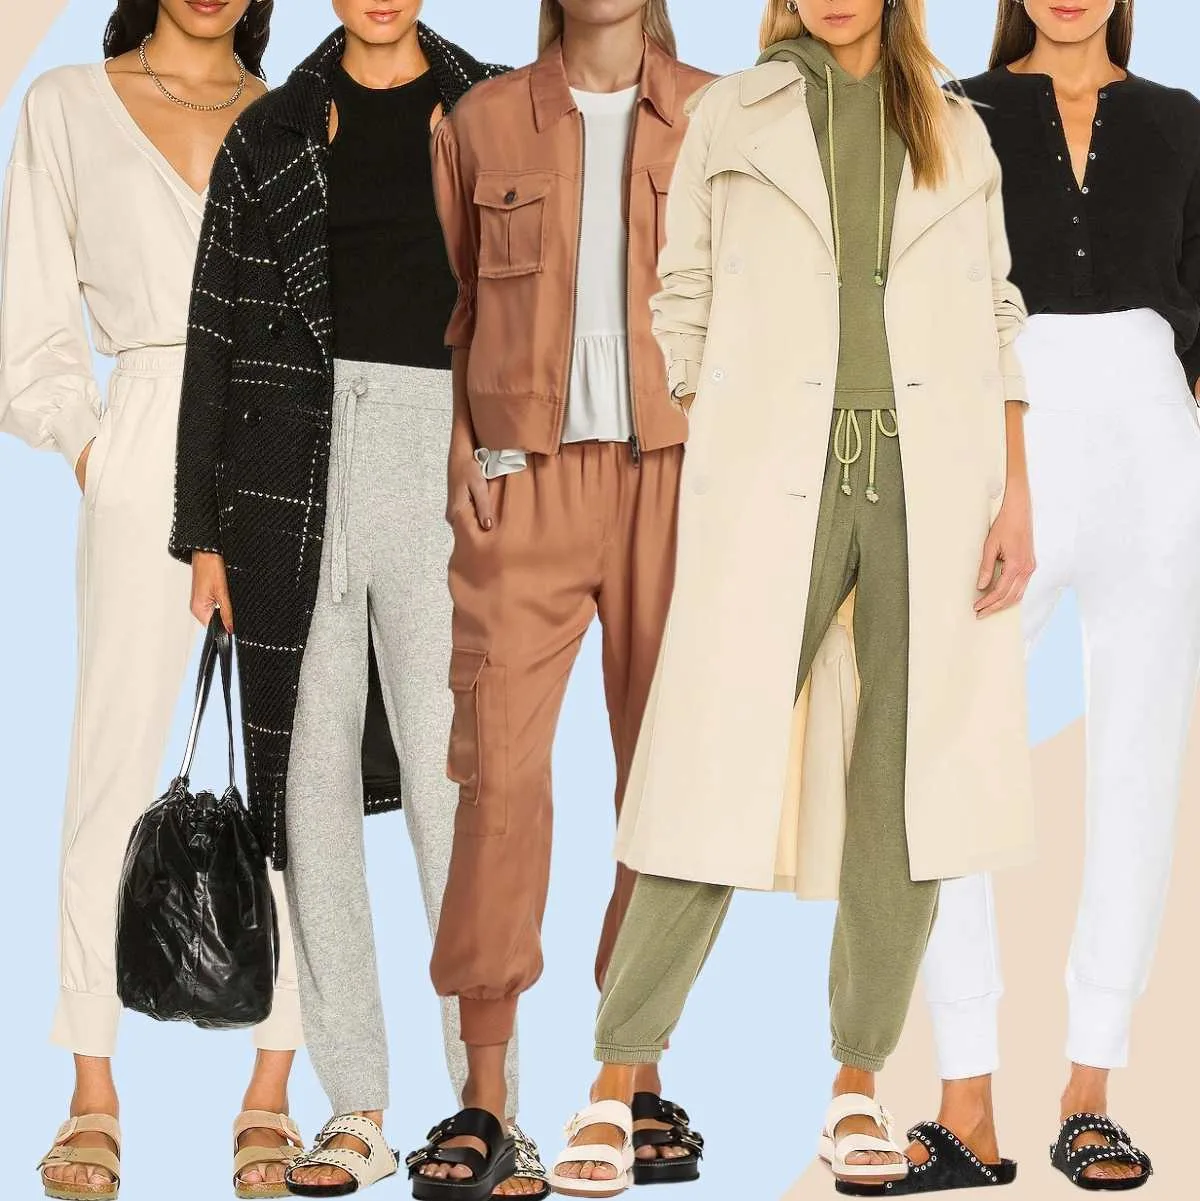 Collage of 5 women wearing different Birkenstock outfits with joggers and sweatpants.